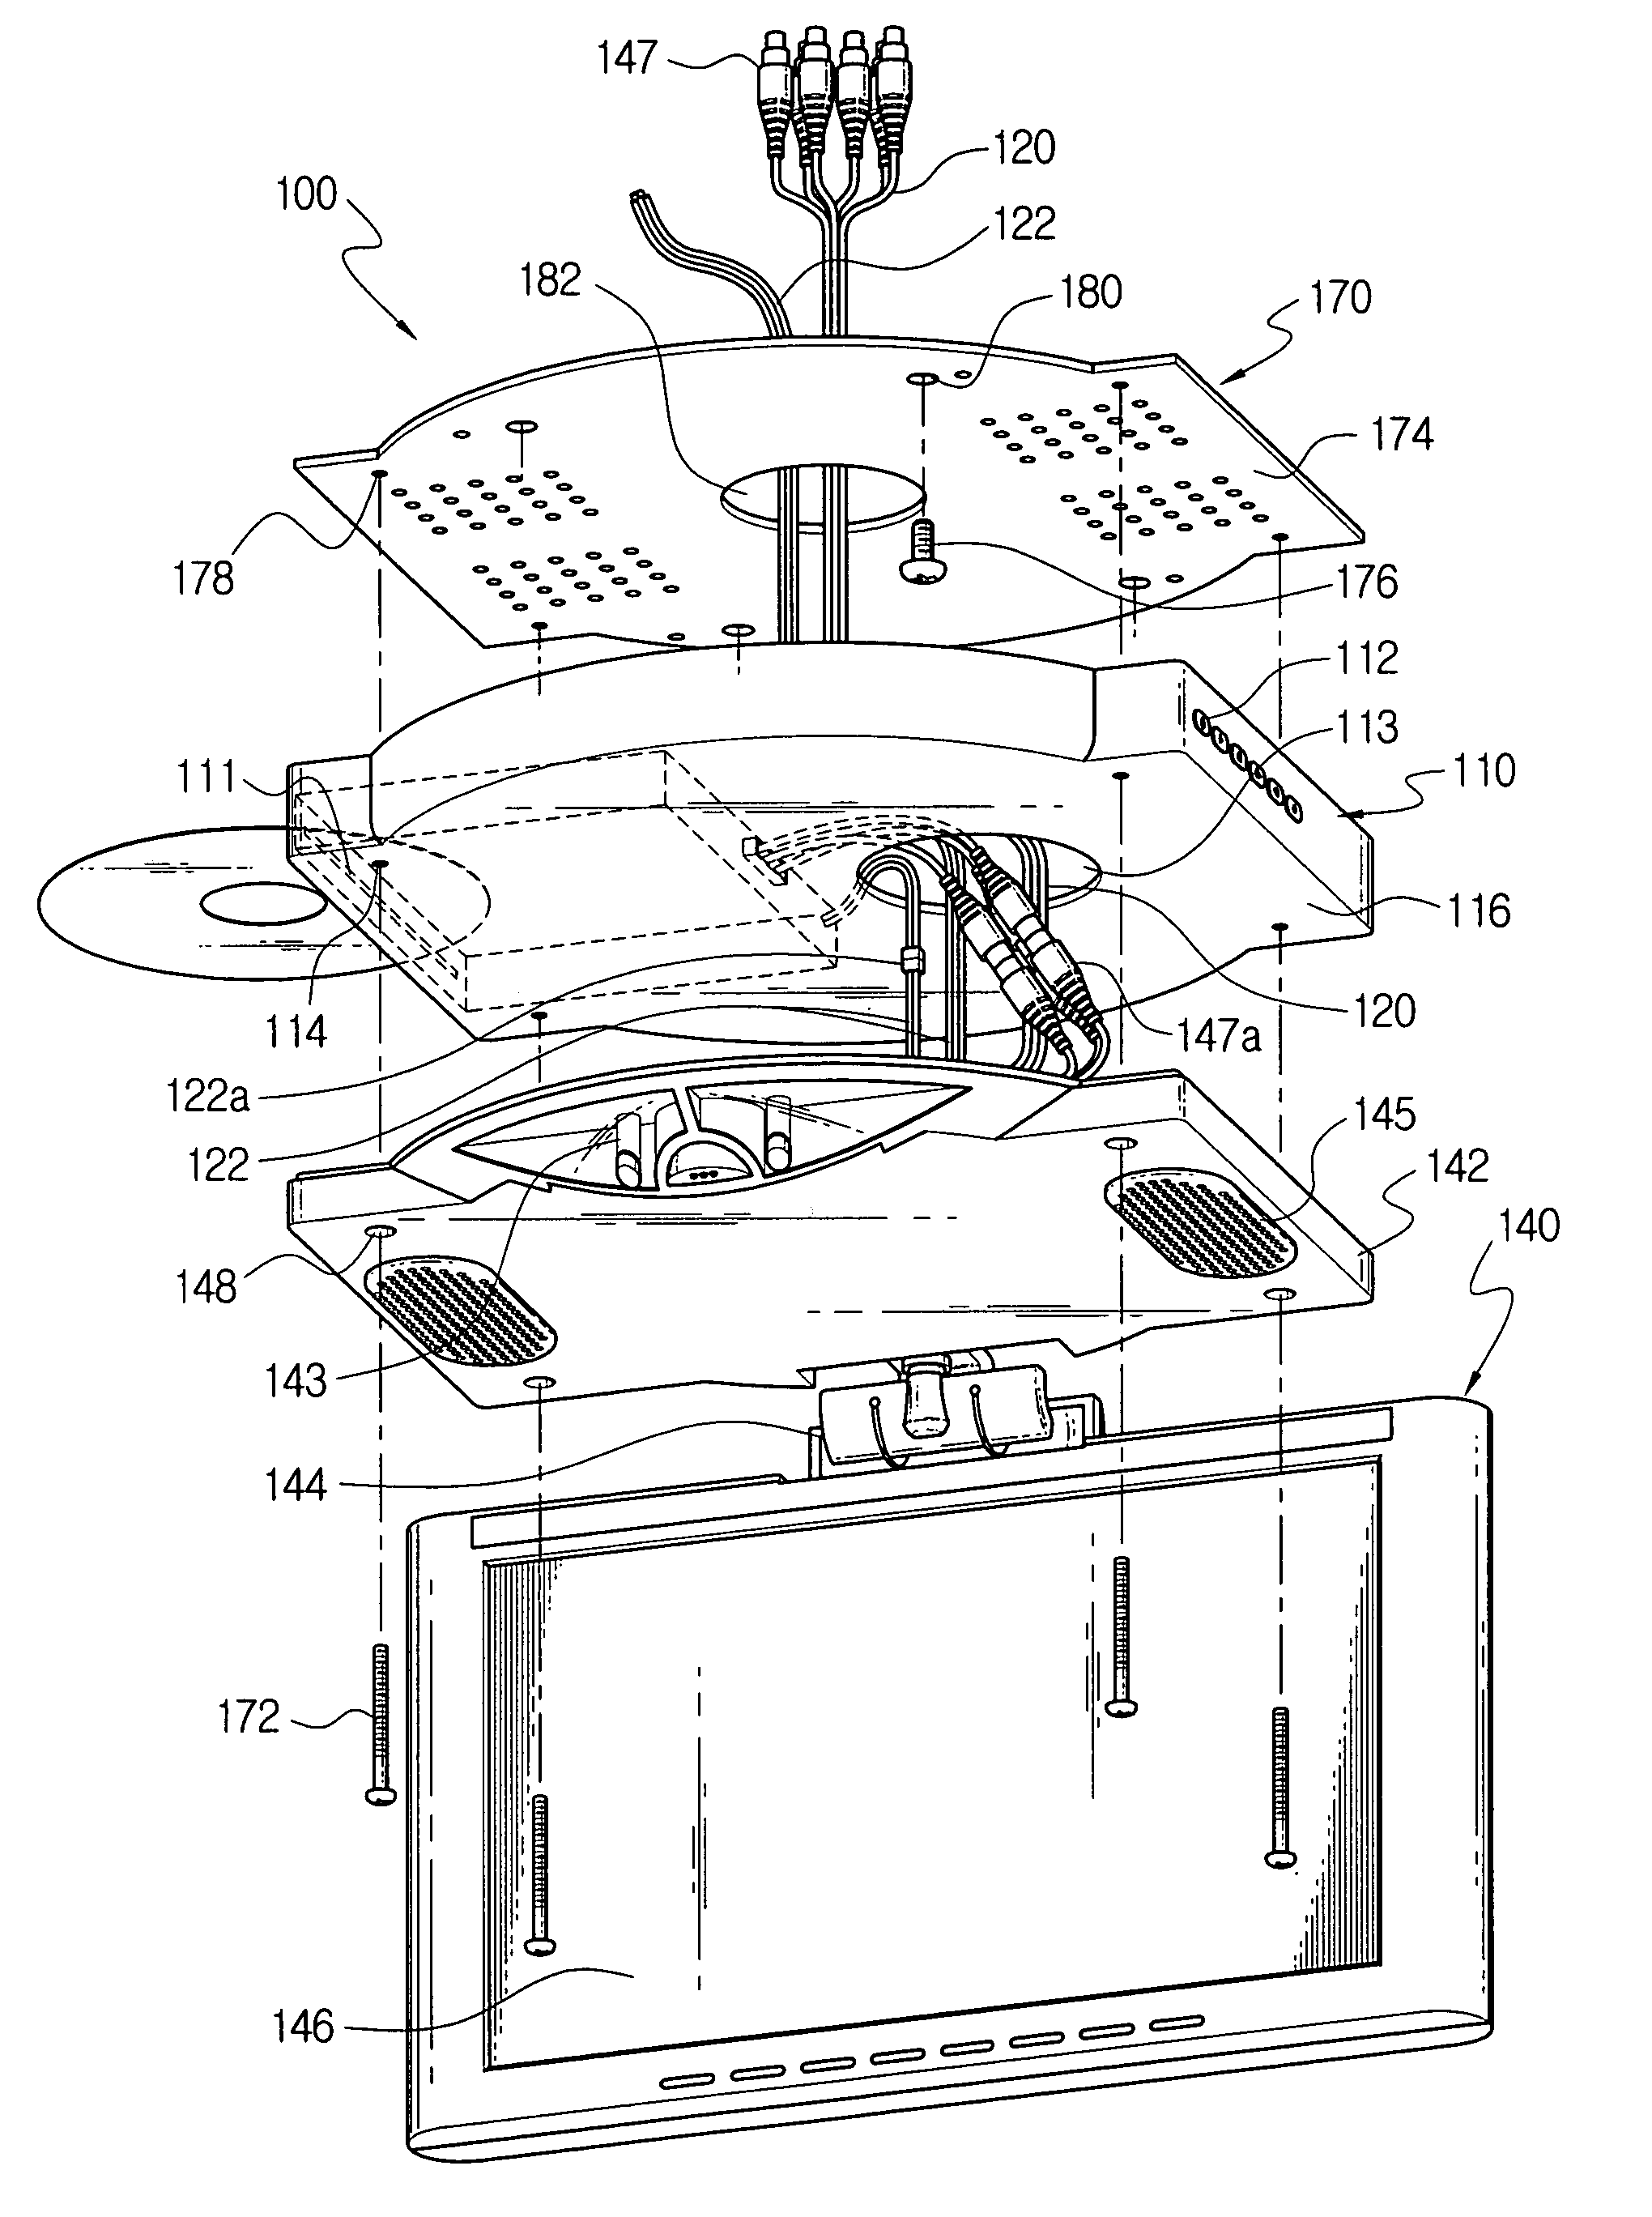 Display apparatus for vehicles